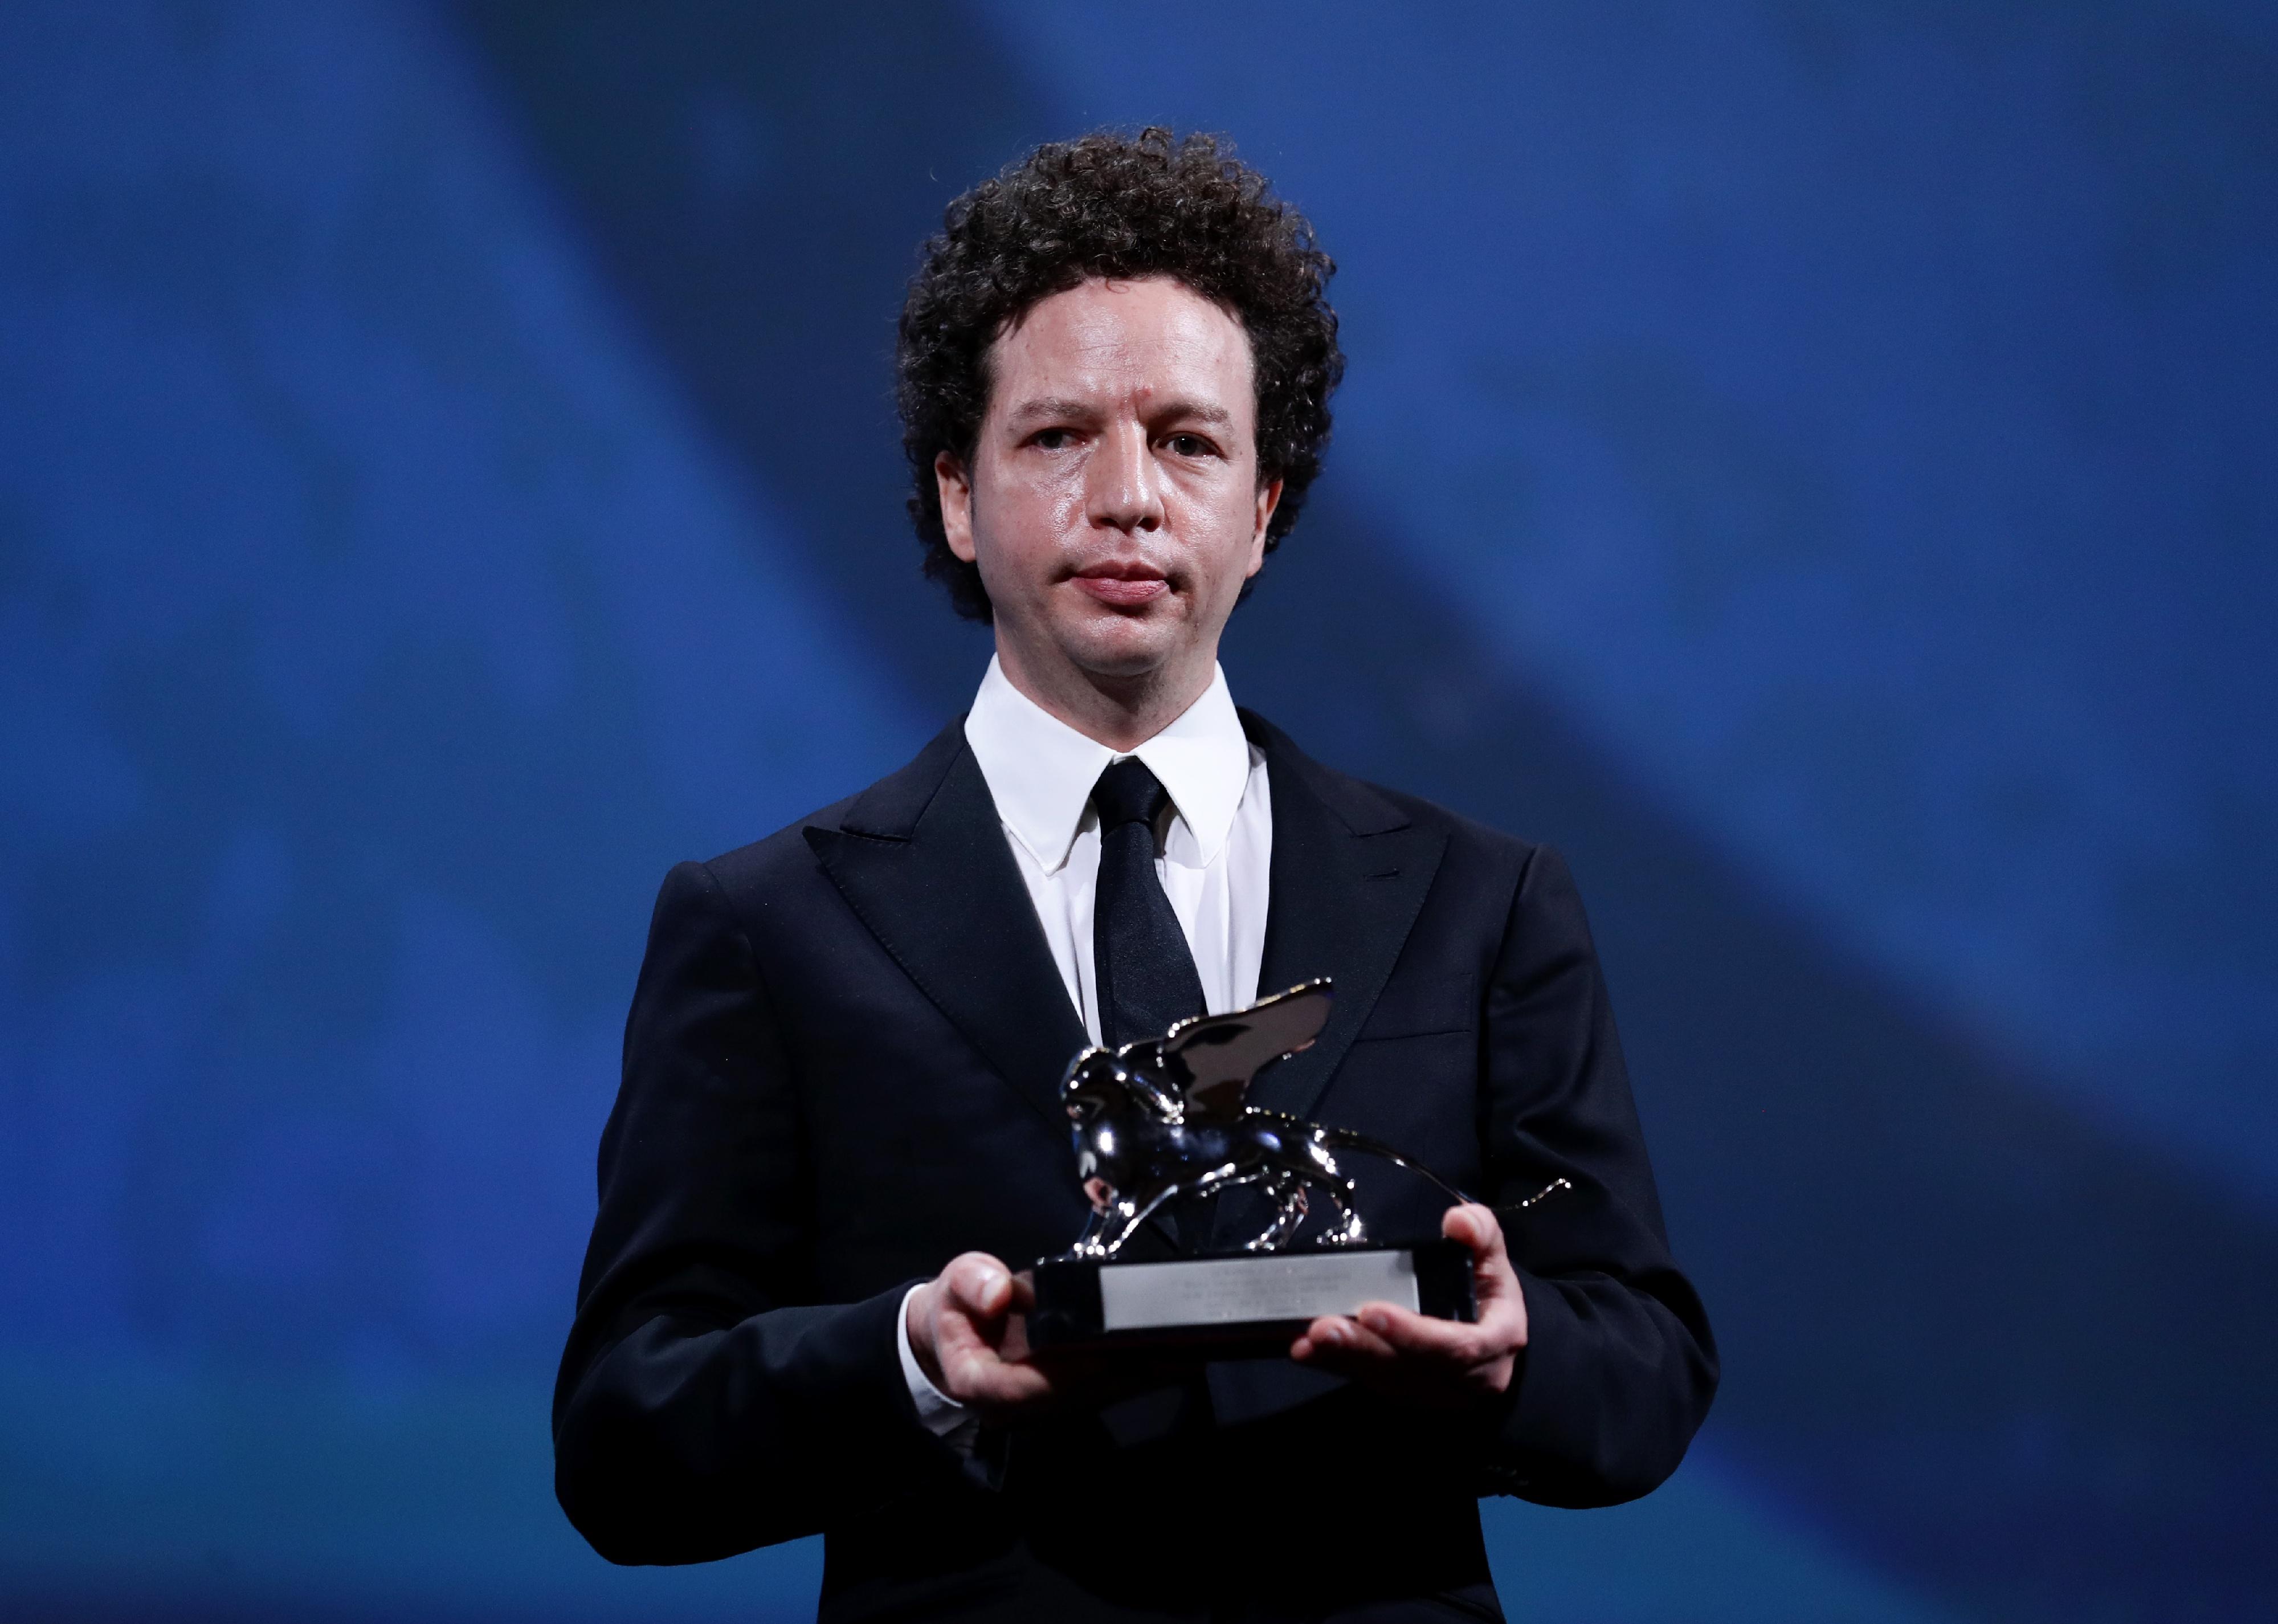 Michel Franco poses with the Silver Lion - Award for Best Director.